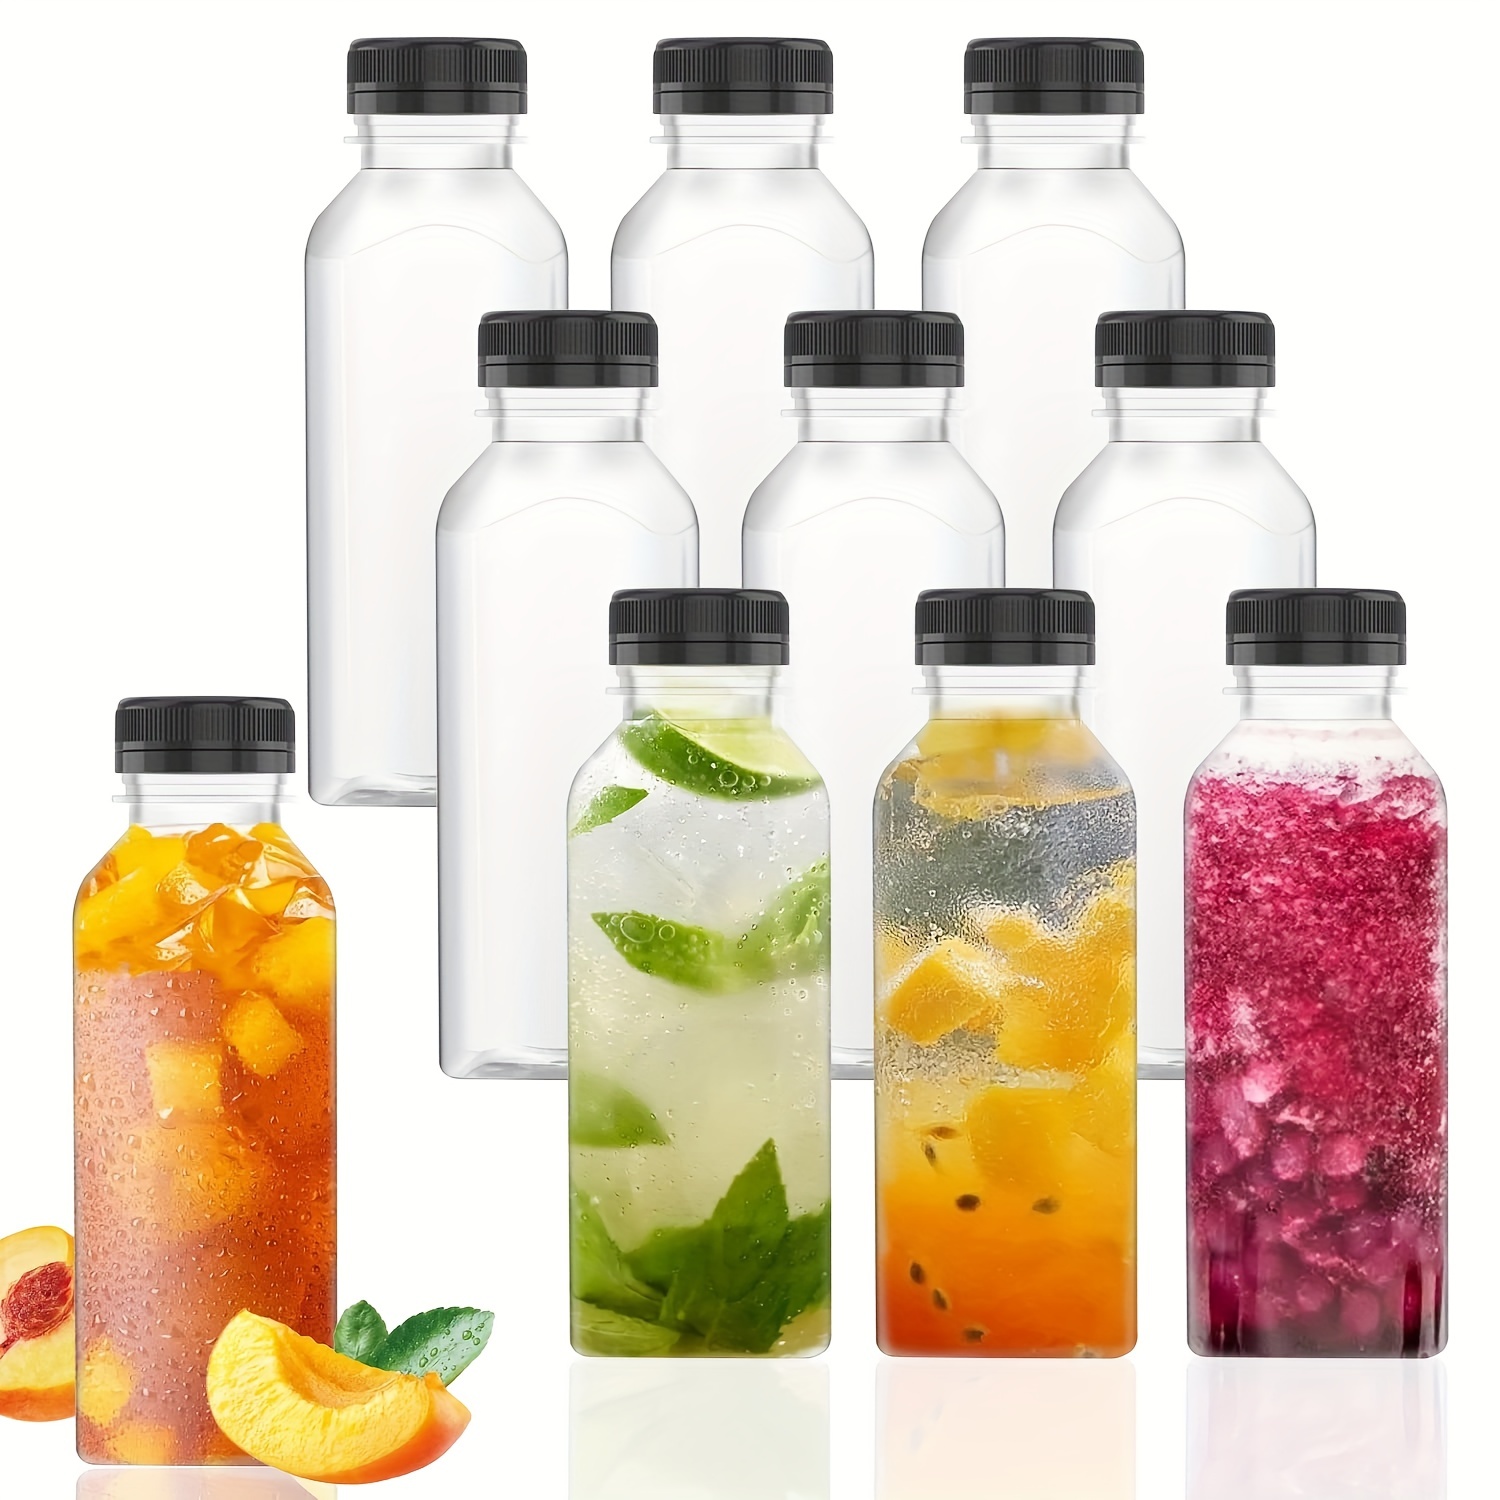 5pcs Plastic Juice Bottles, Clear Drink Containers For Homemade Beverages,  Leakproof, Large Capacity, Creative Bottles For Smoothie, Juice, Milk, And  Other Drinks